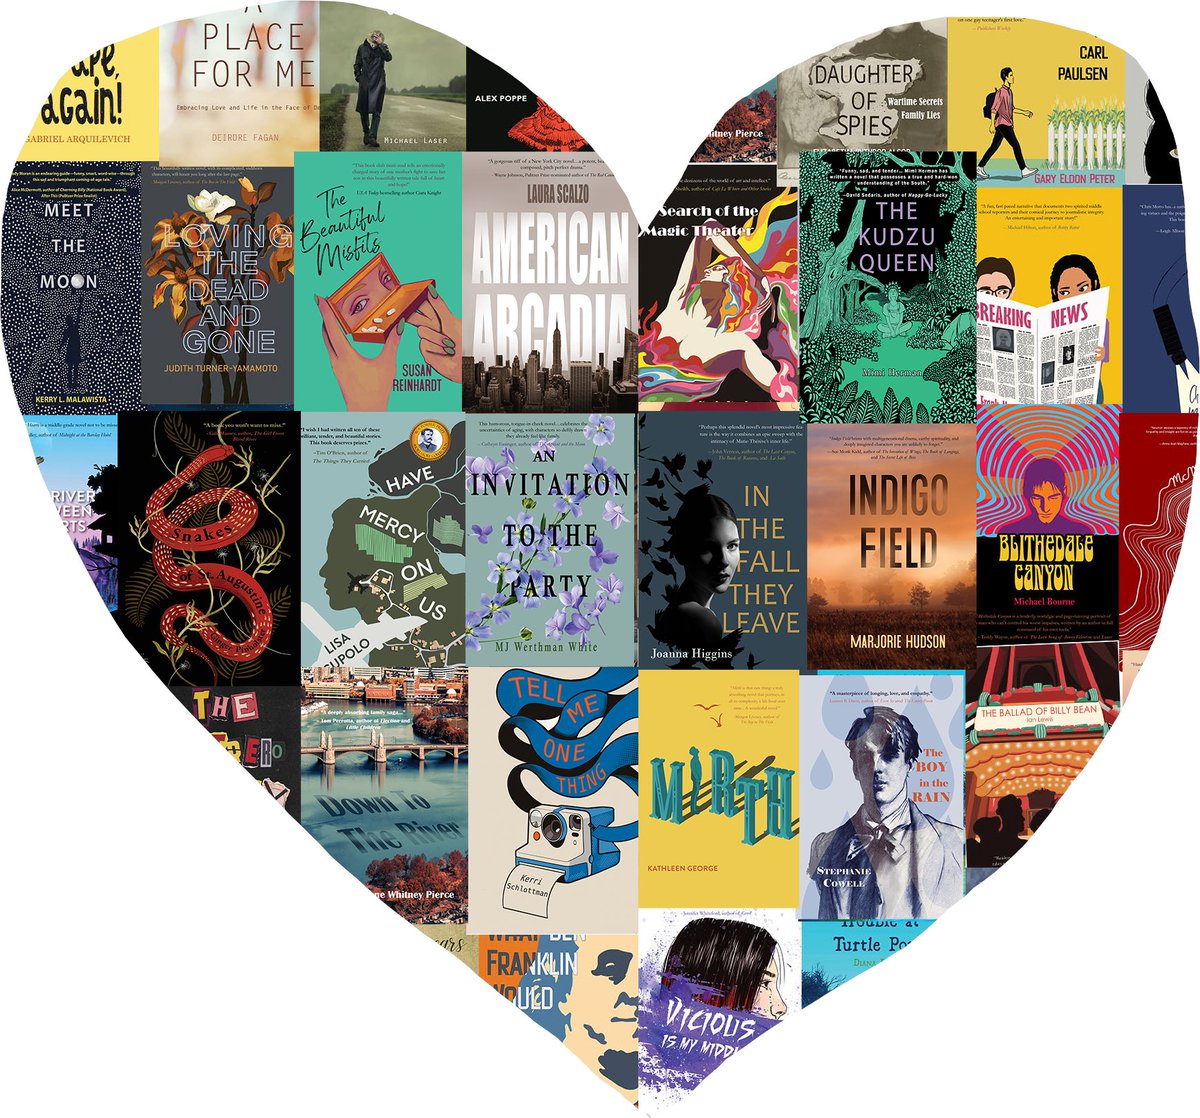 We are so excited to announce our new #booklove mailings: six titles from our award-winning catalog delivered to your door on the first of each month, with title discounts and free shipping! With each purchase, you help keep our lights on! …al-house-publishing.mybigcommerce.com/book-love/